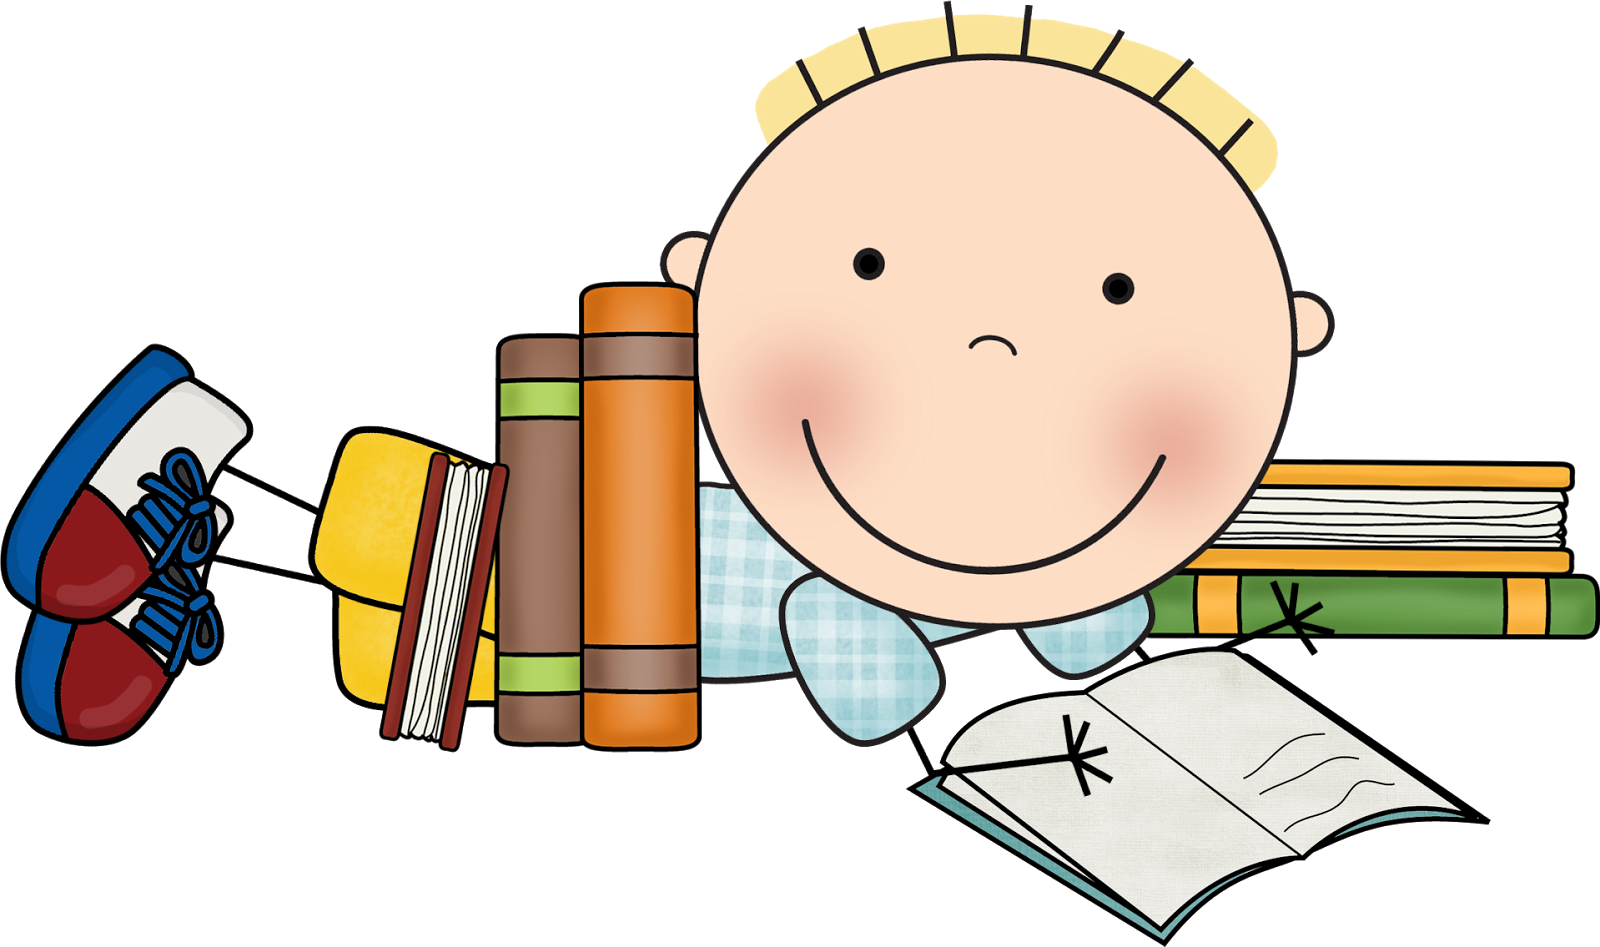 literacy clipart for kids